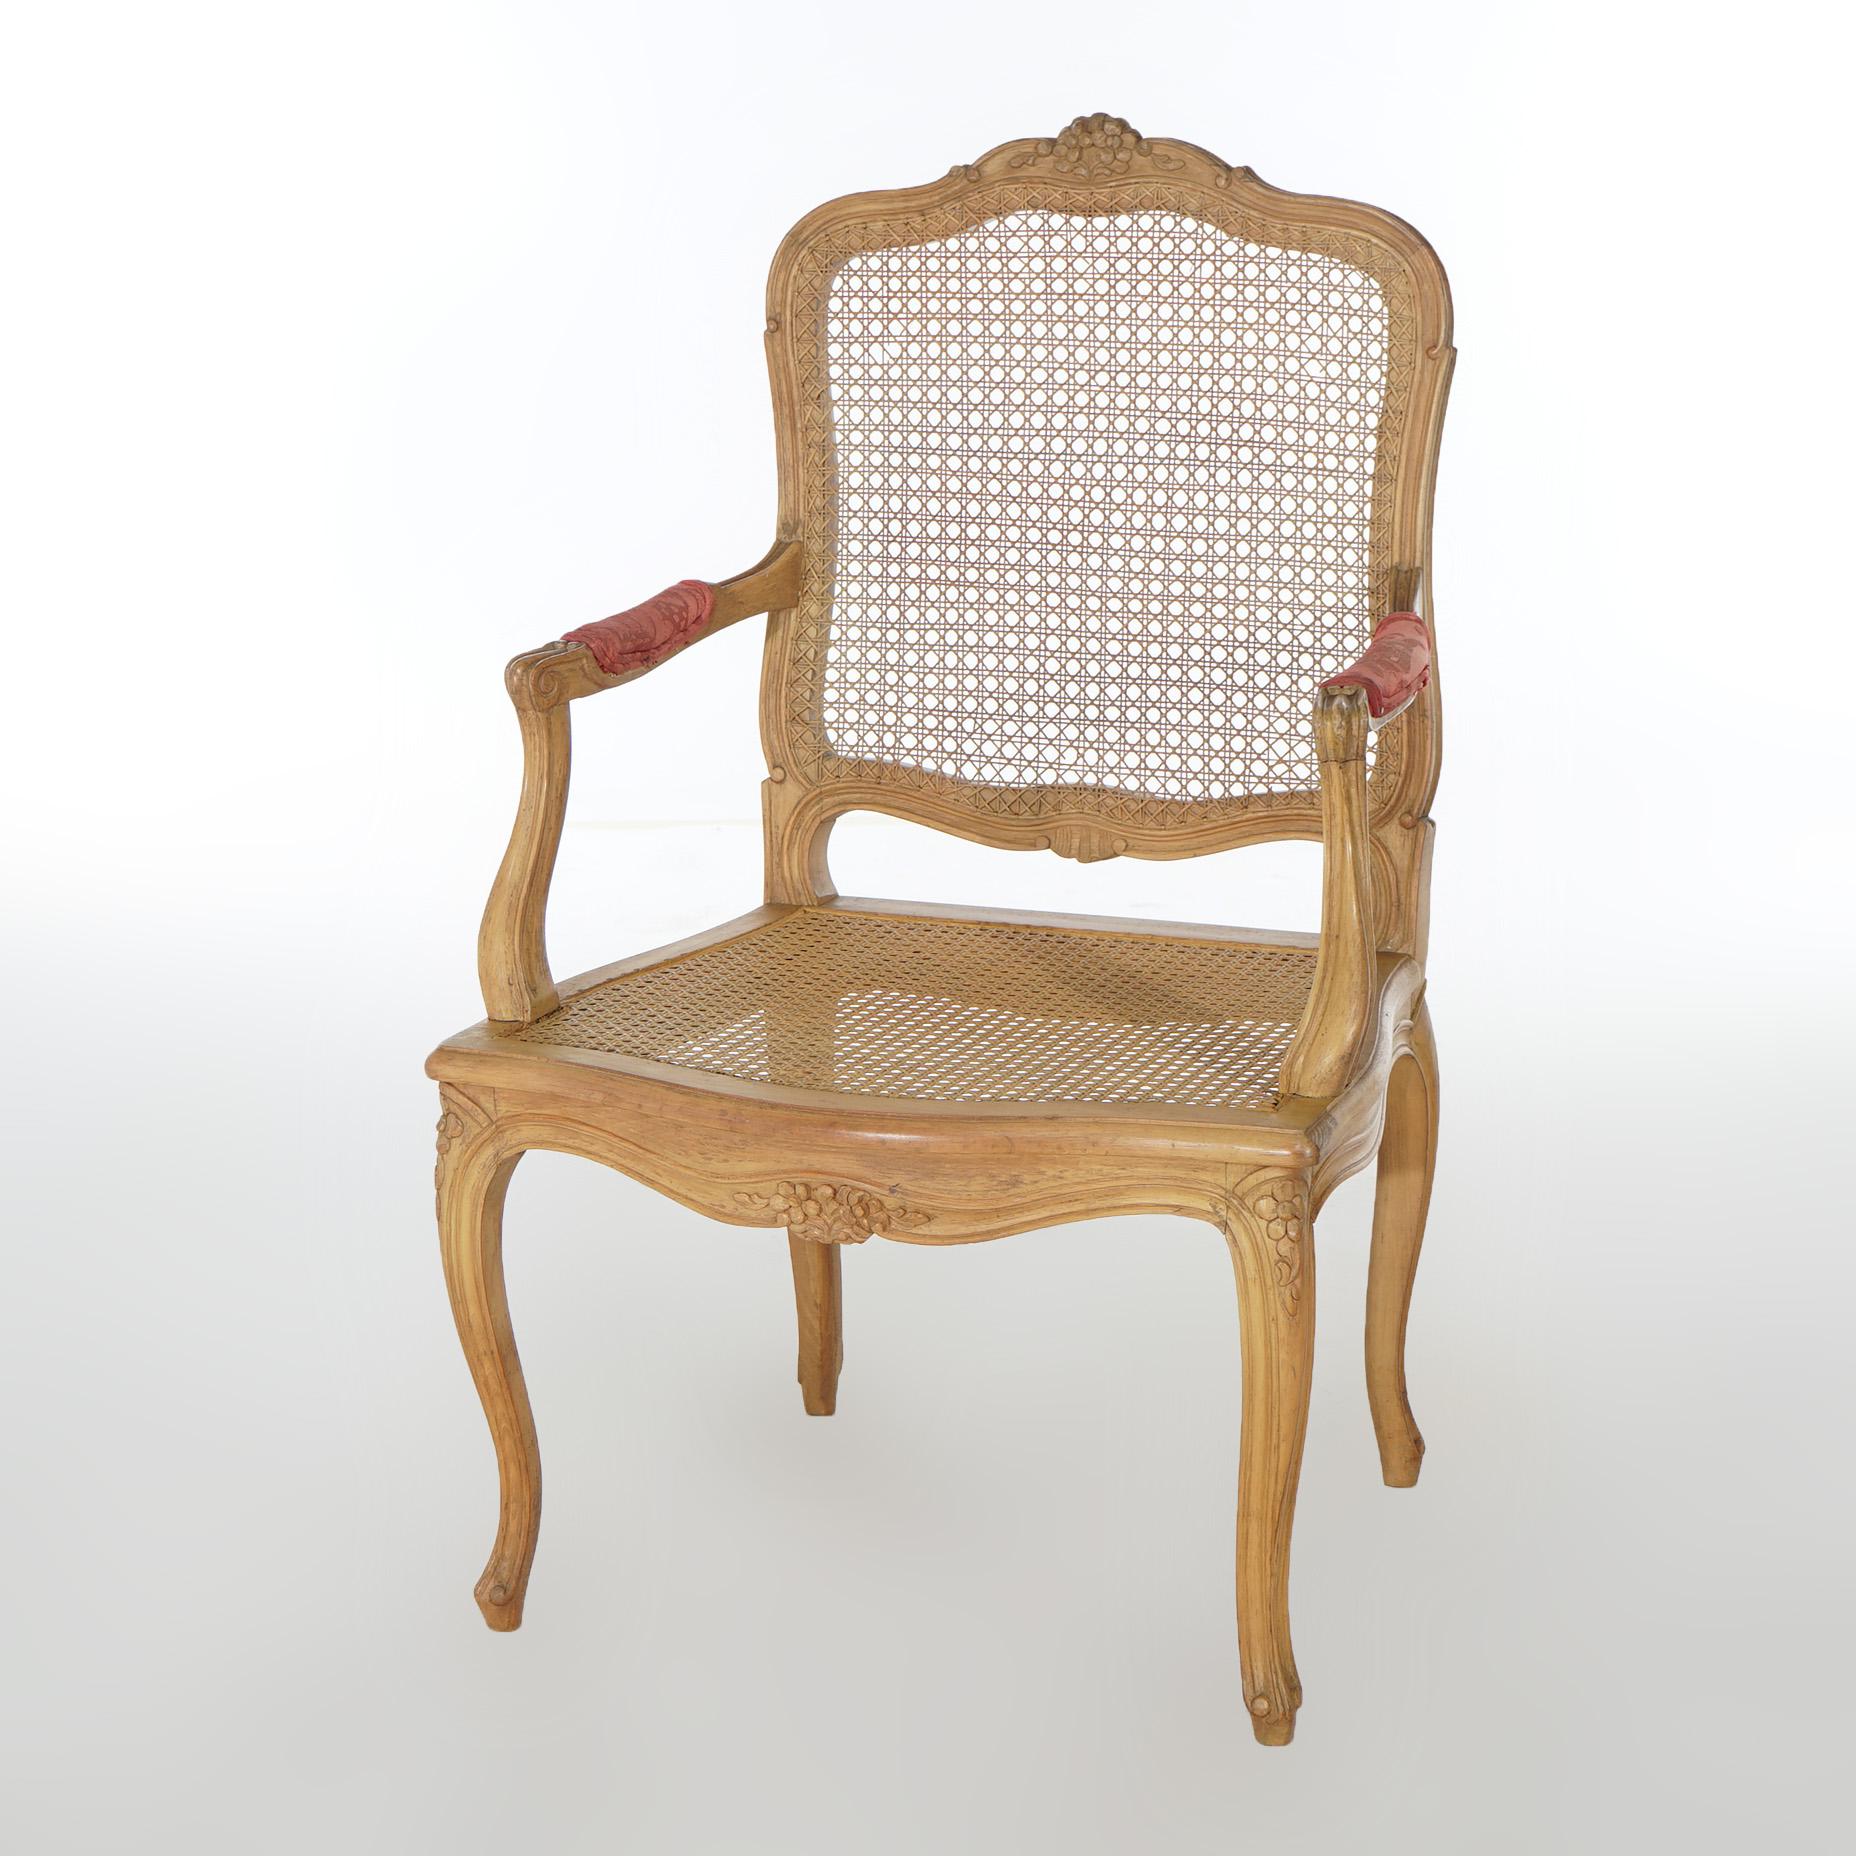 An antique French Louis XV style arm chair offers carved fruitwood frame having floral crest over caned seat and back, covered arms and raised on cabriole legs, c1900

Measures - 39.5